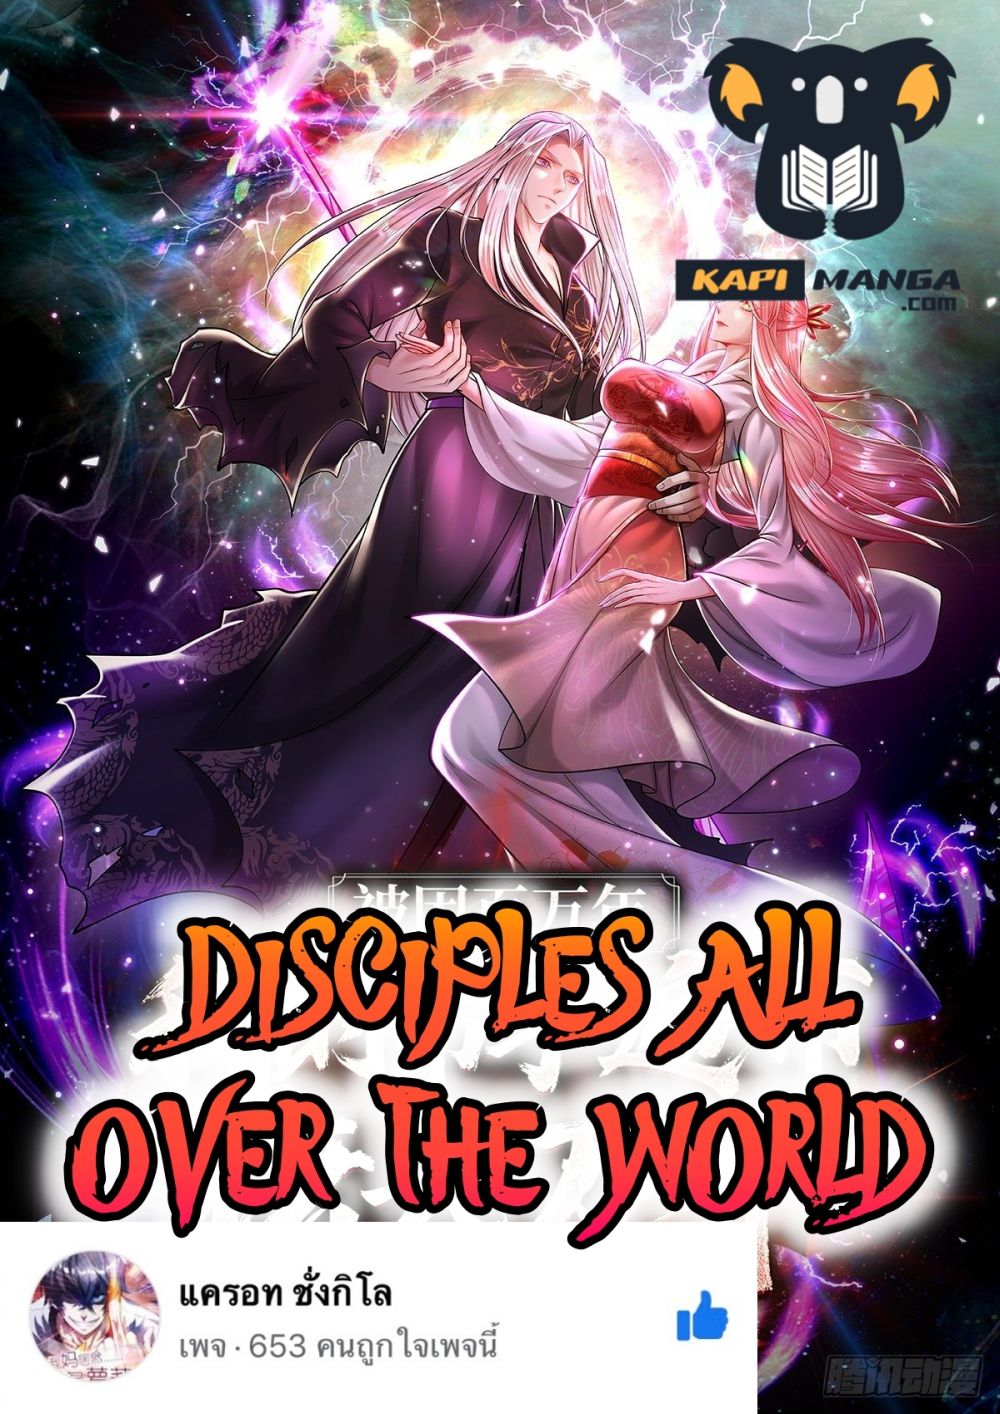 Disciples All Over the World à¸à¸­à¸à¸à¸µà¹ 55 (1)